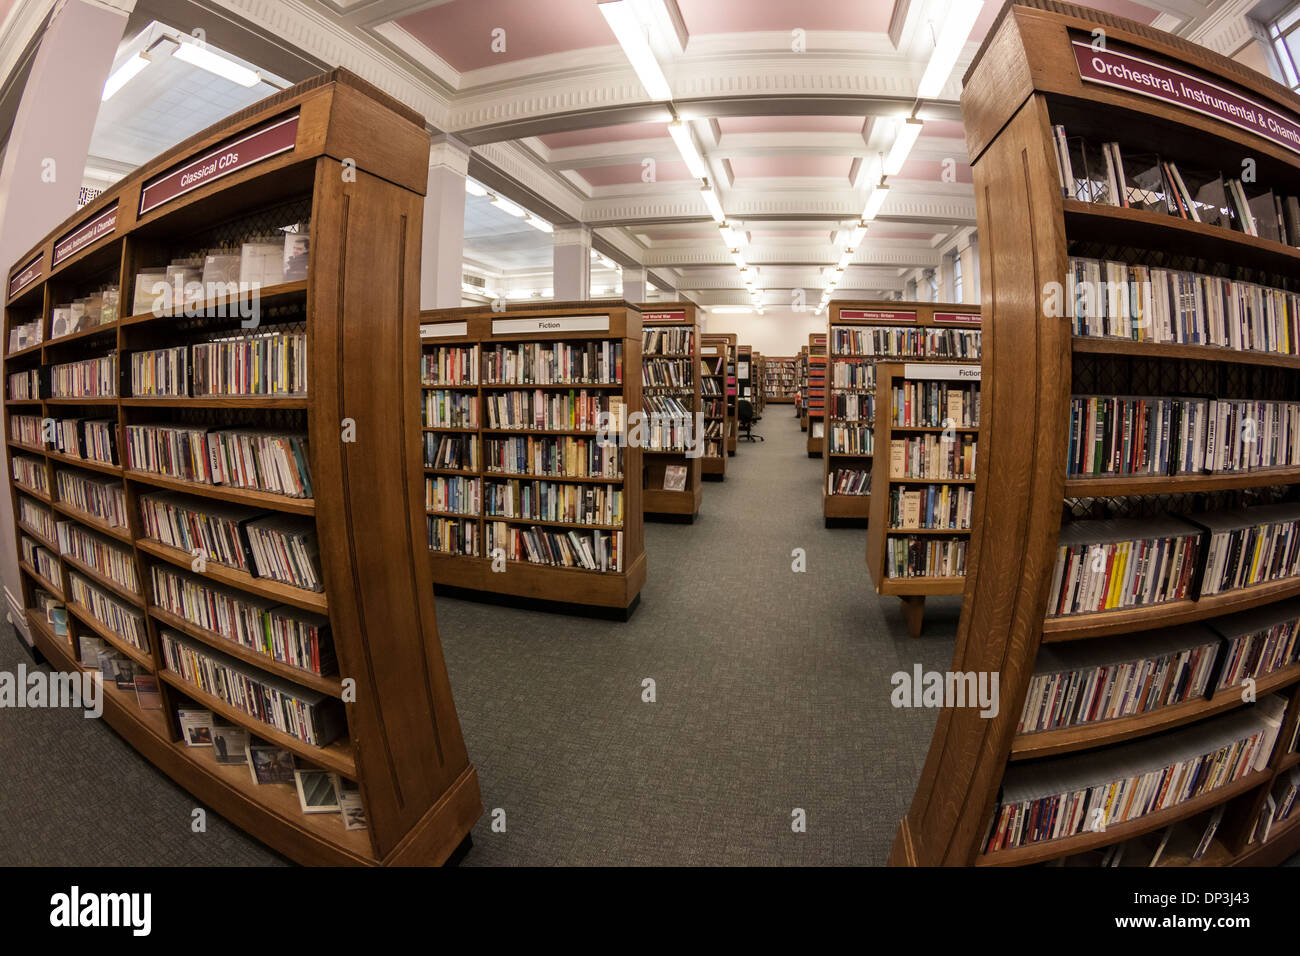 Sheffield Central Library Interior Stock Photo